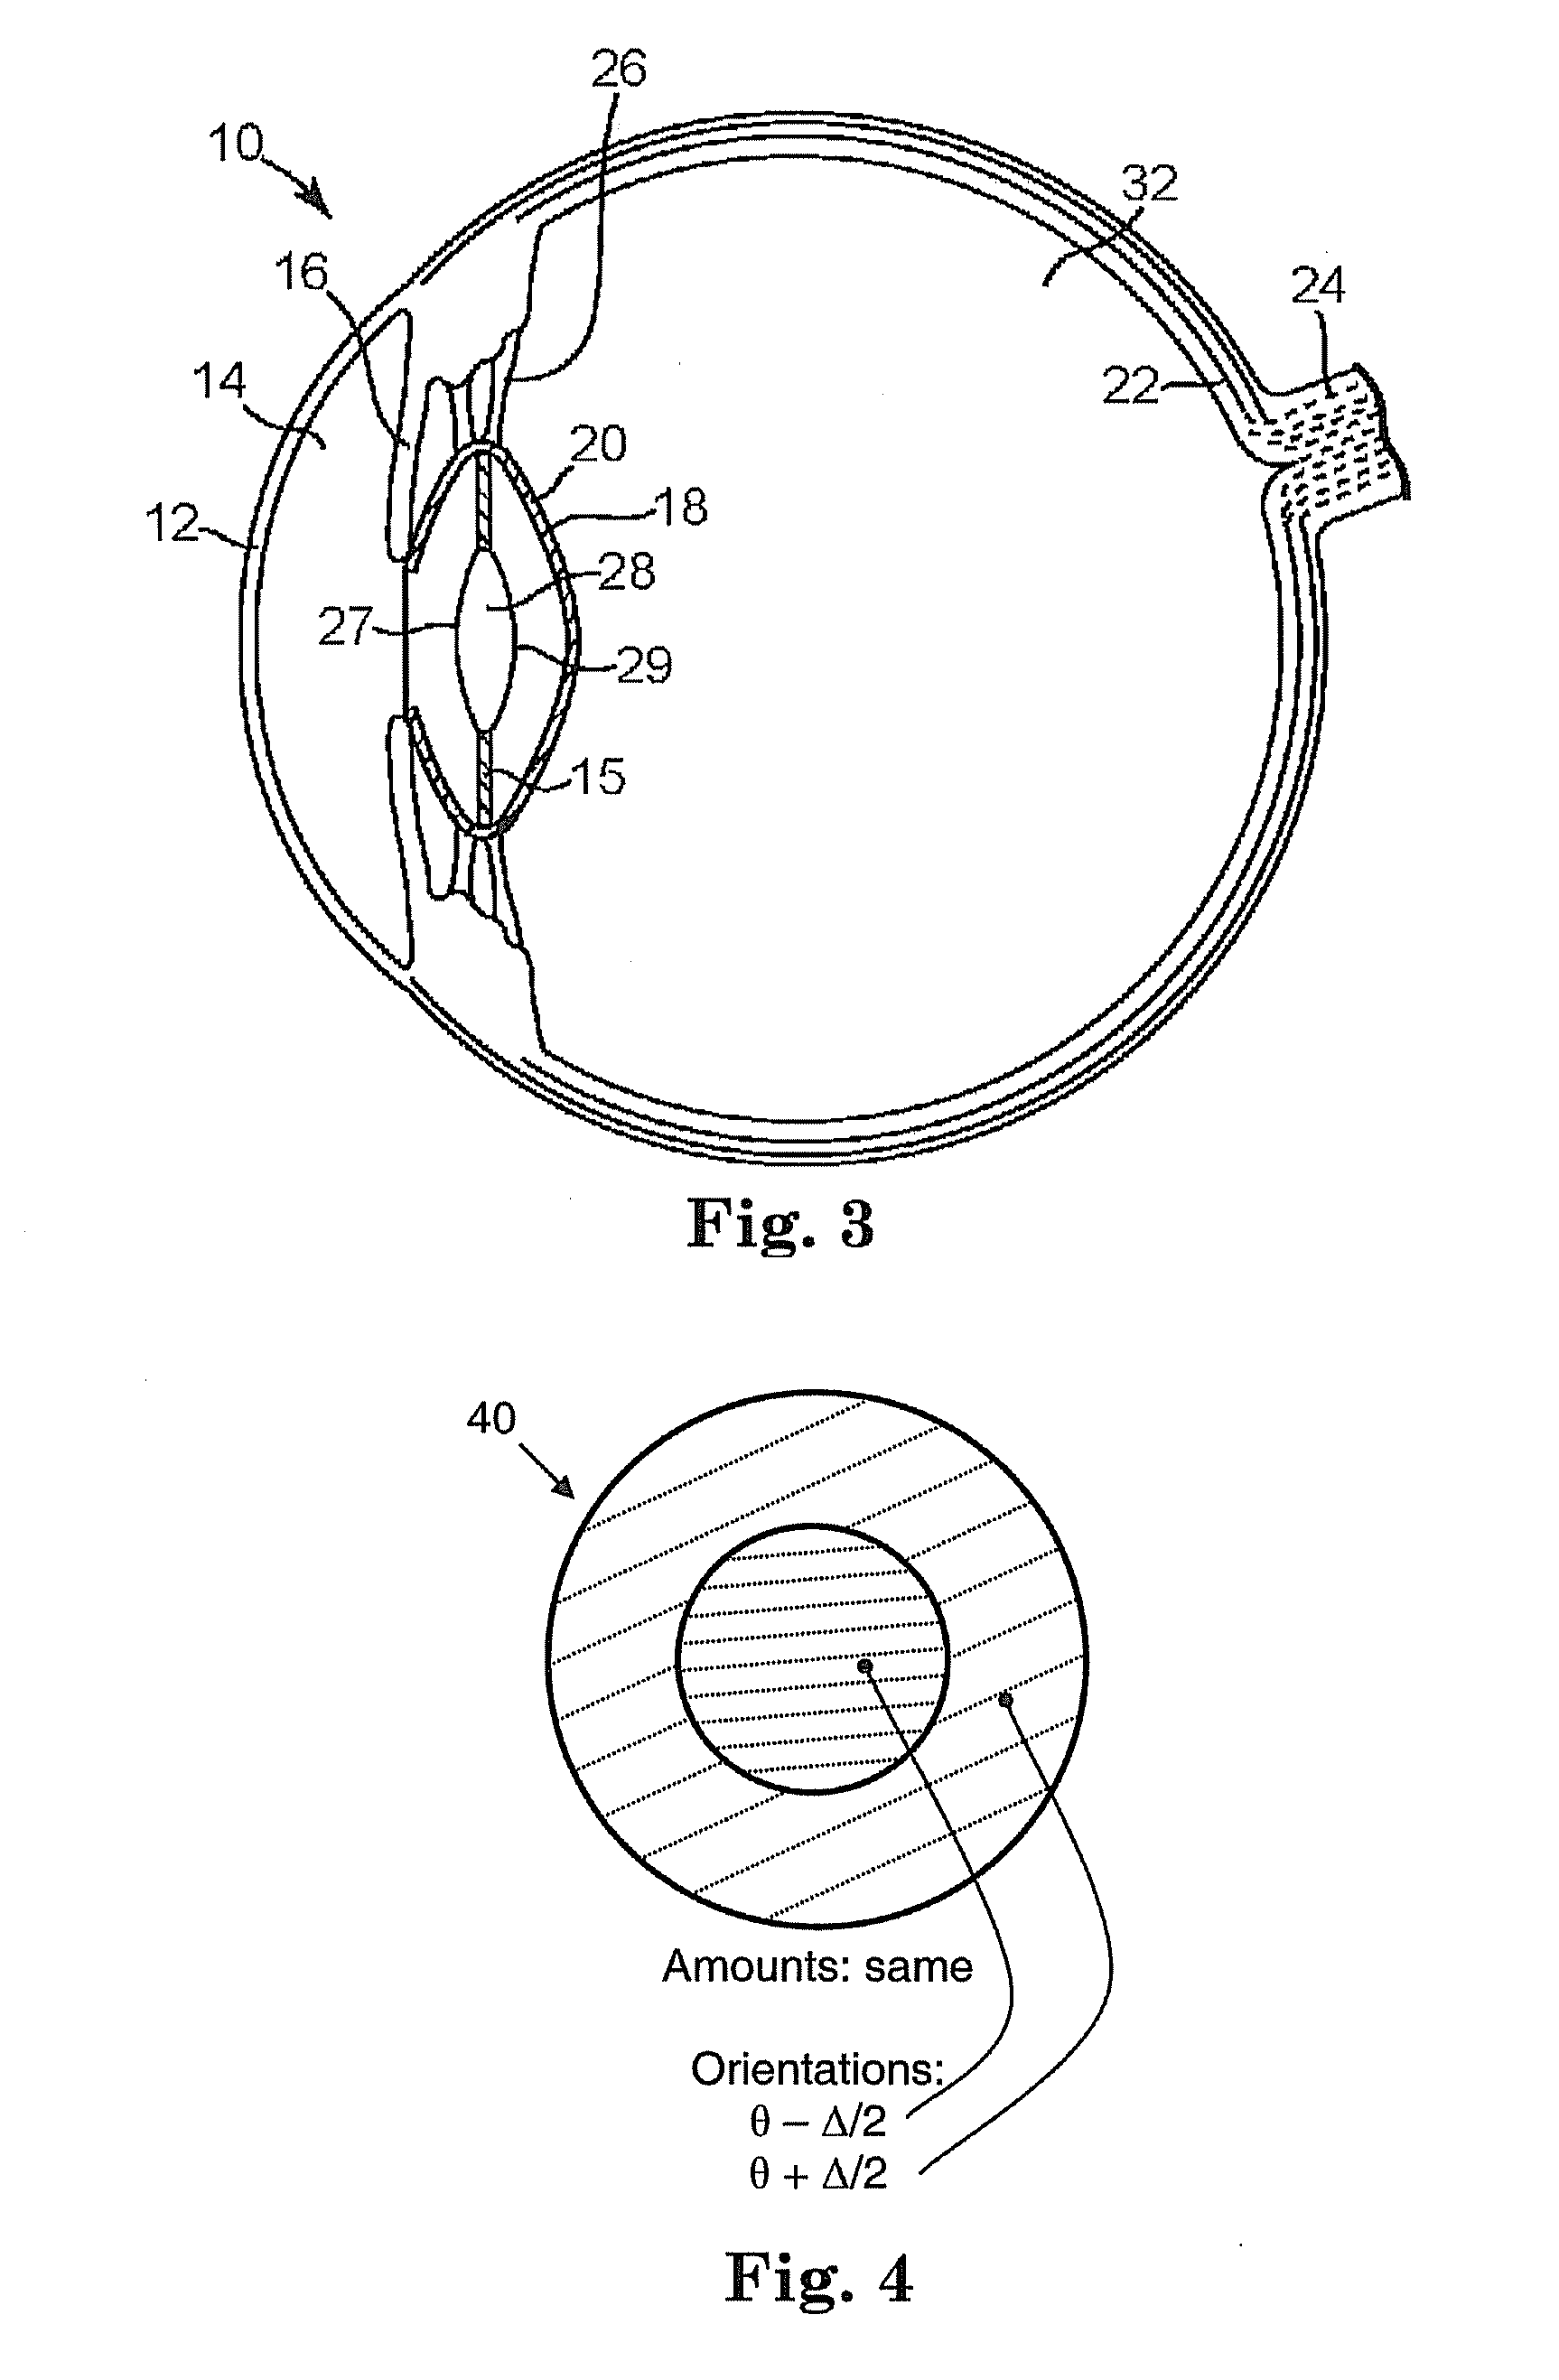 Toric intraocular lens with modified power characteristics